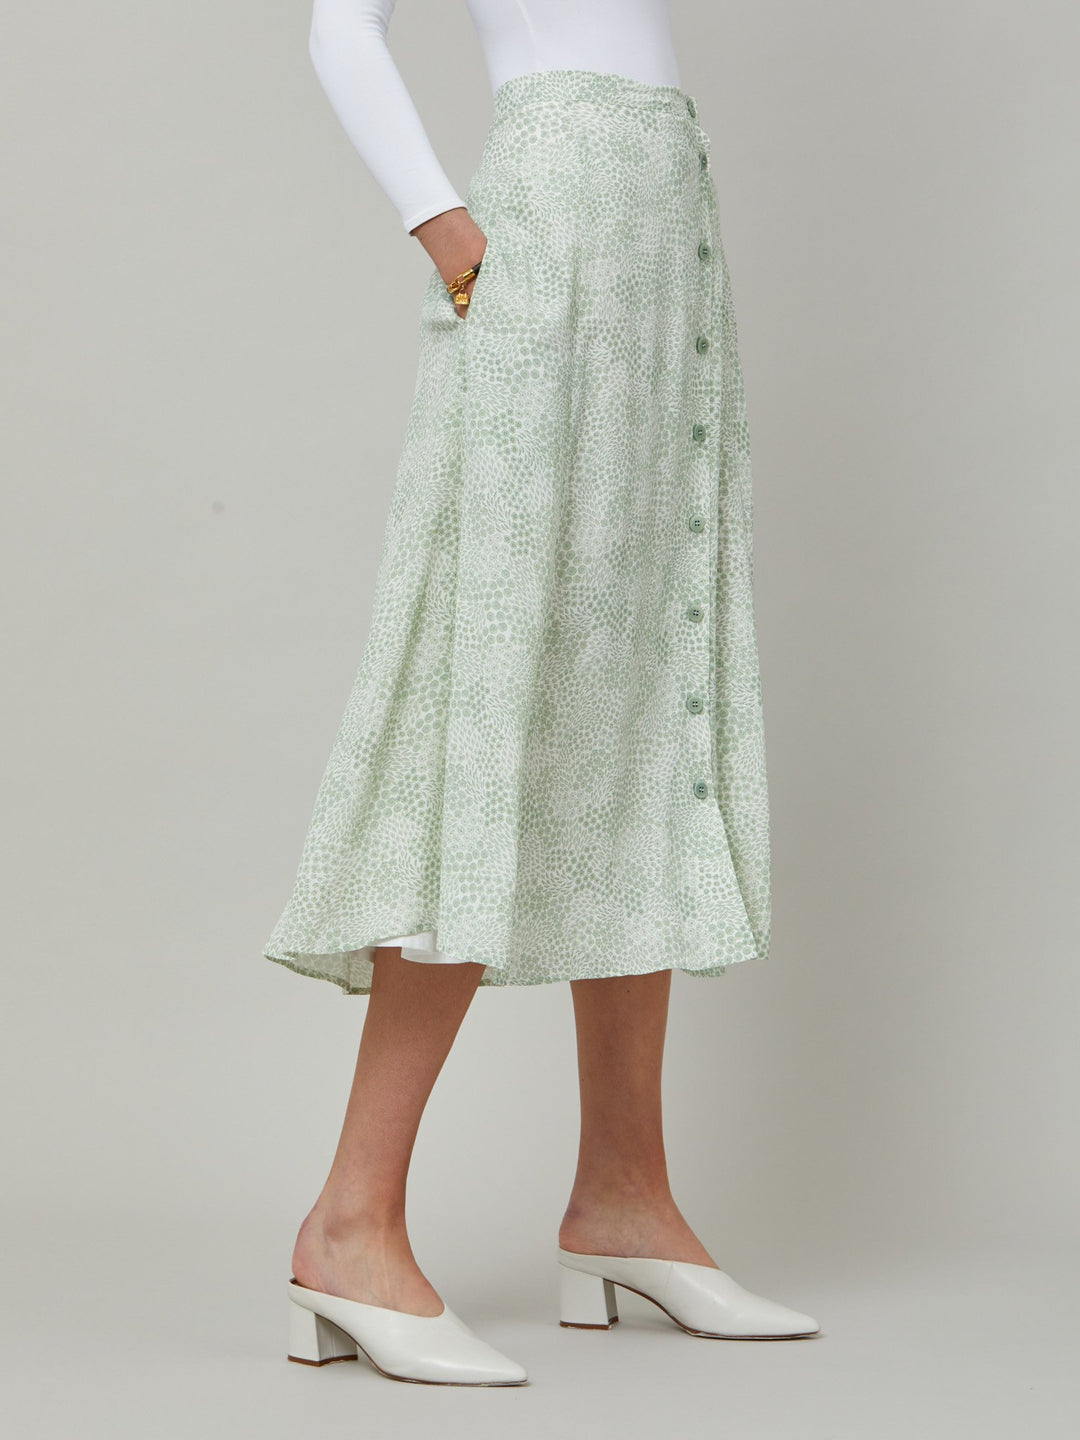 The essential summer skirt. Meet Sadie, a vintage bi-color mini floral in viscose crepe. Off-centered button through A-line silhouette with an elasticated back waistband. Relaxed elegance for everyday life. Style with our white timeless tops or dress it down with the Khloe tea-green sweatshirt.